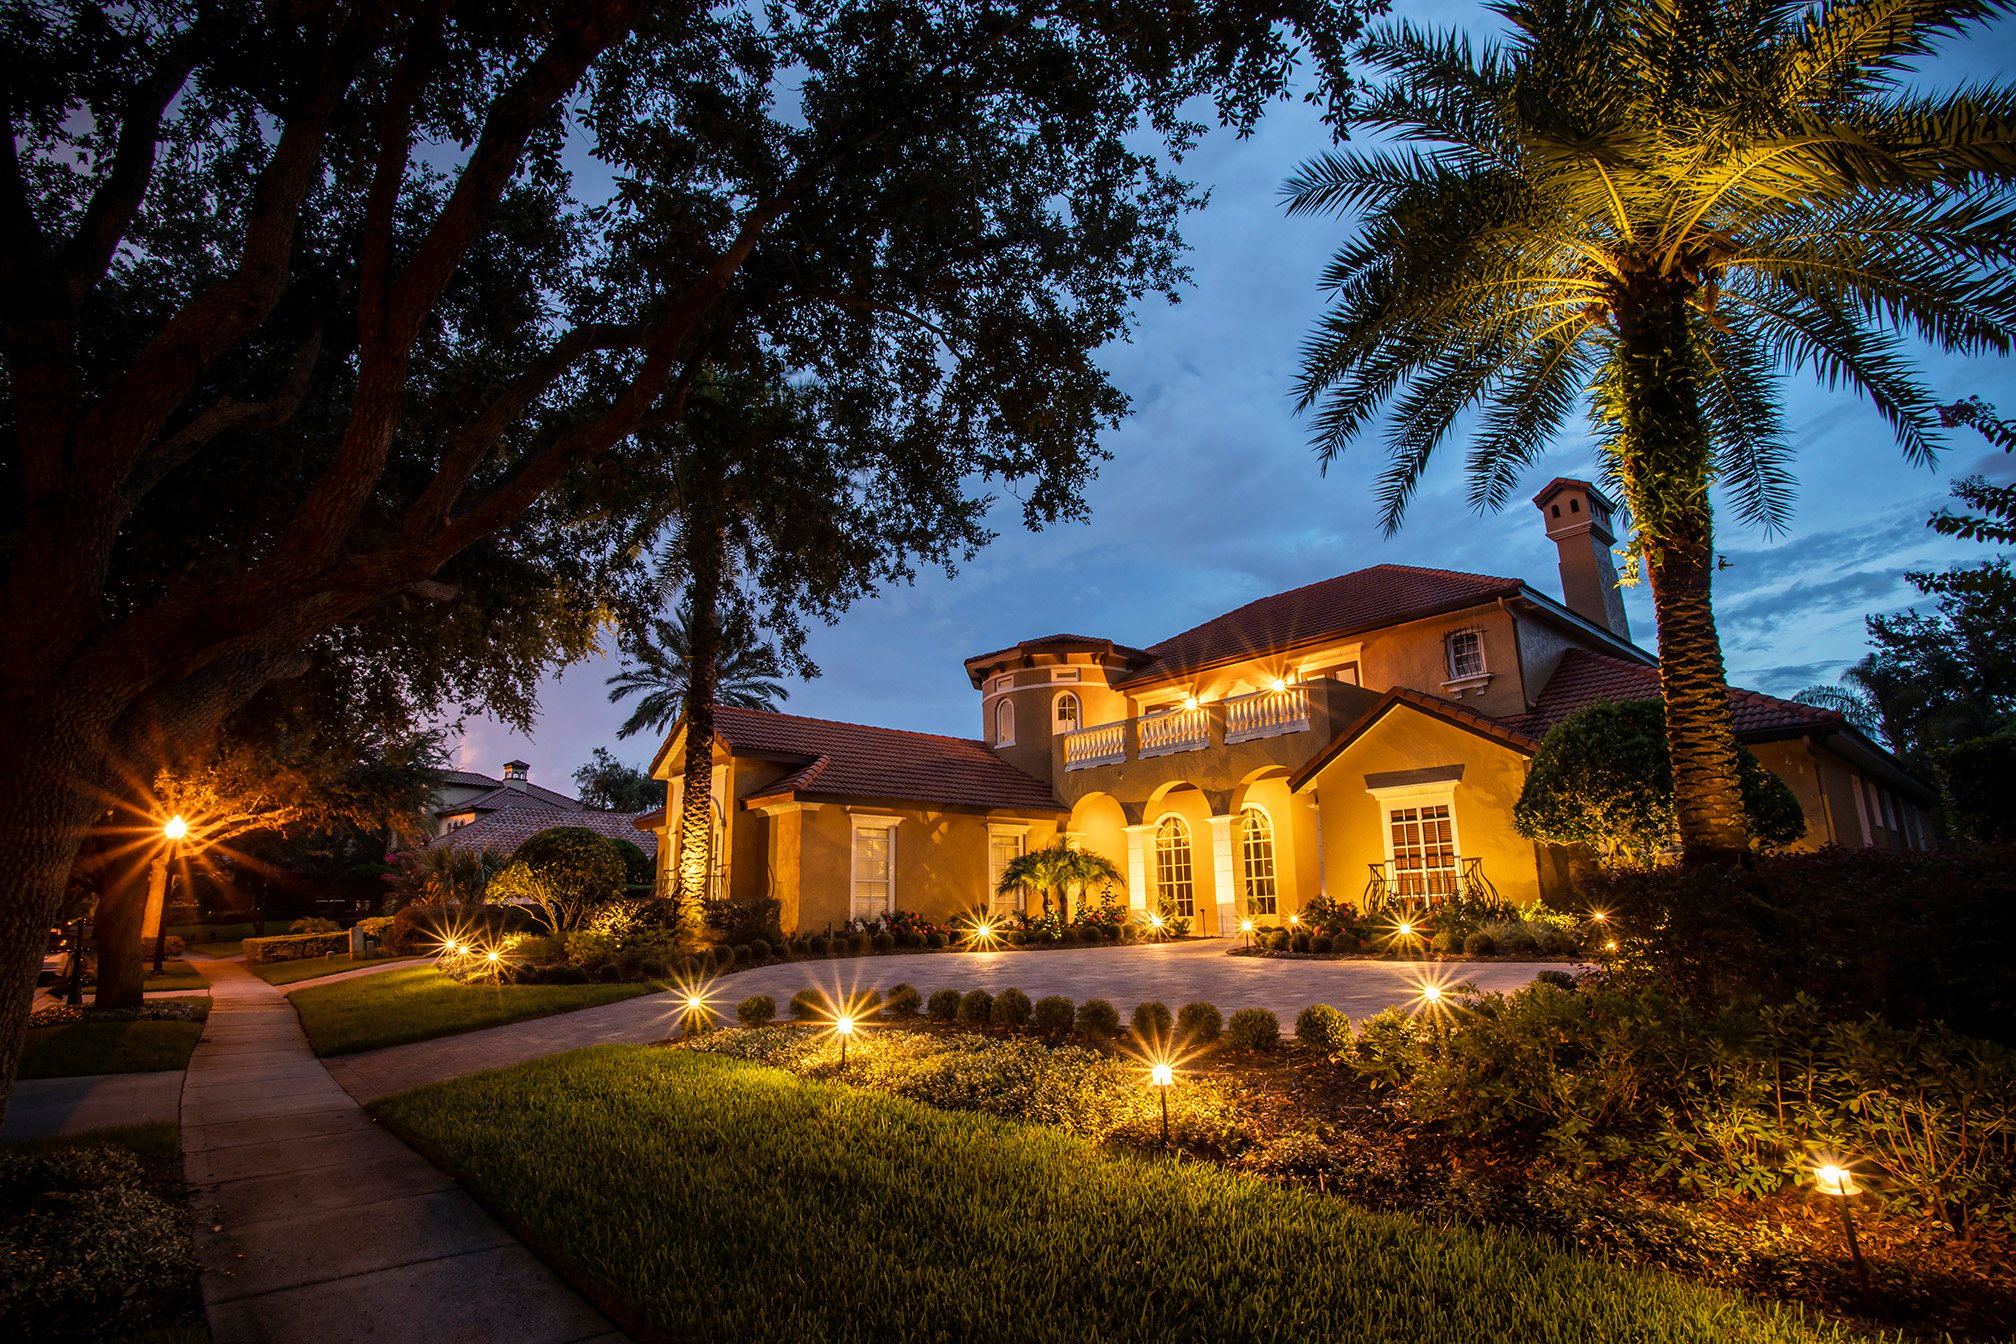 landscape lighting in front yard and driveway